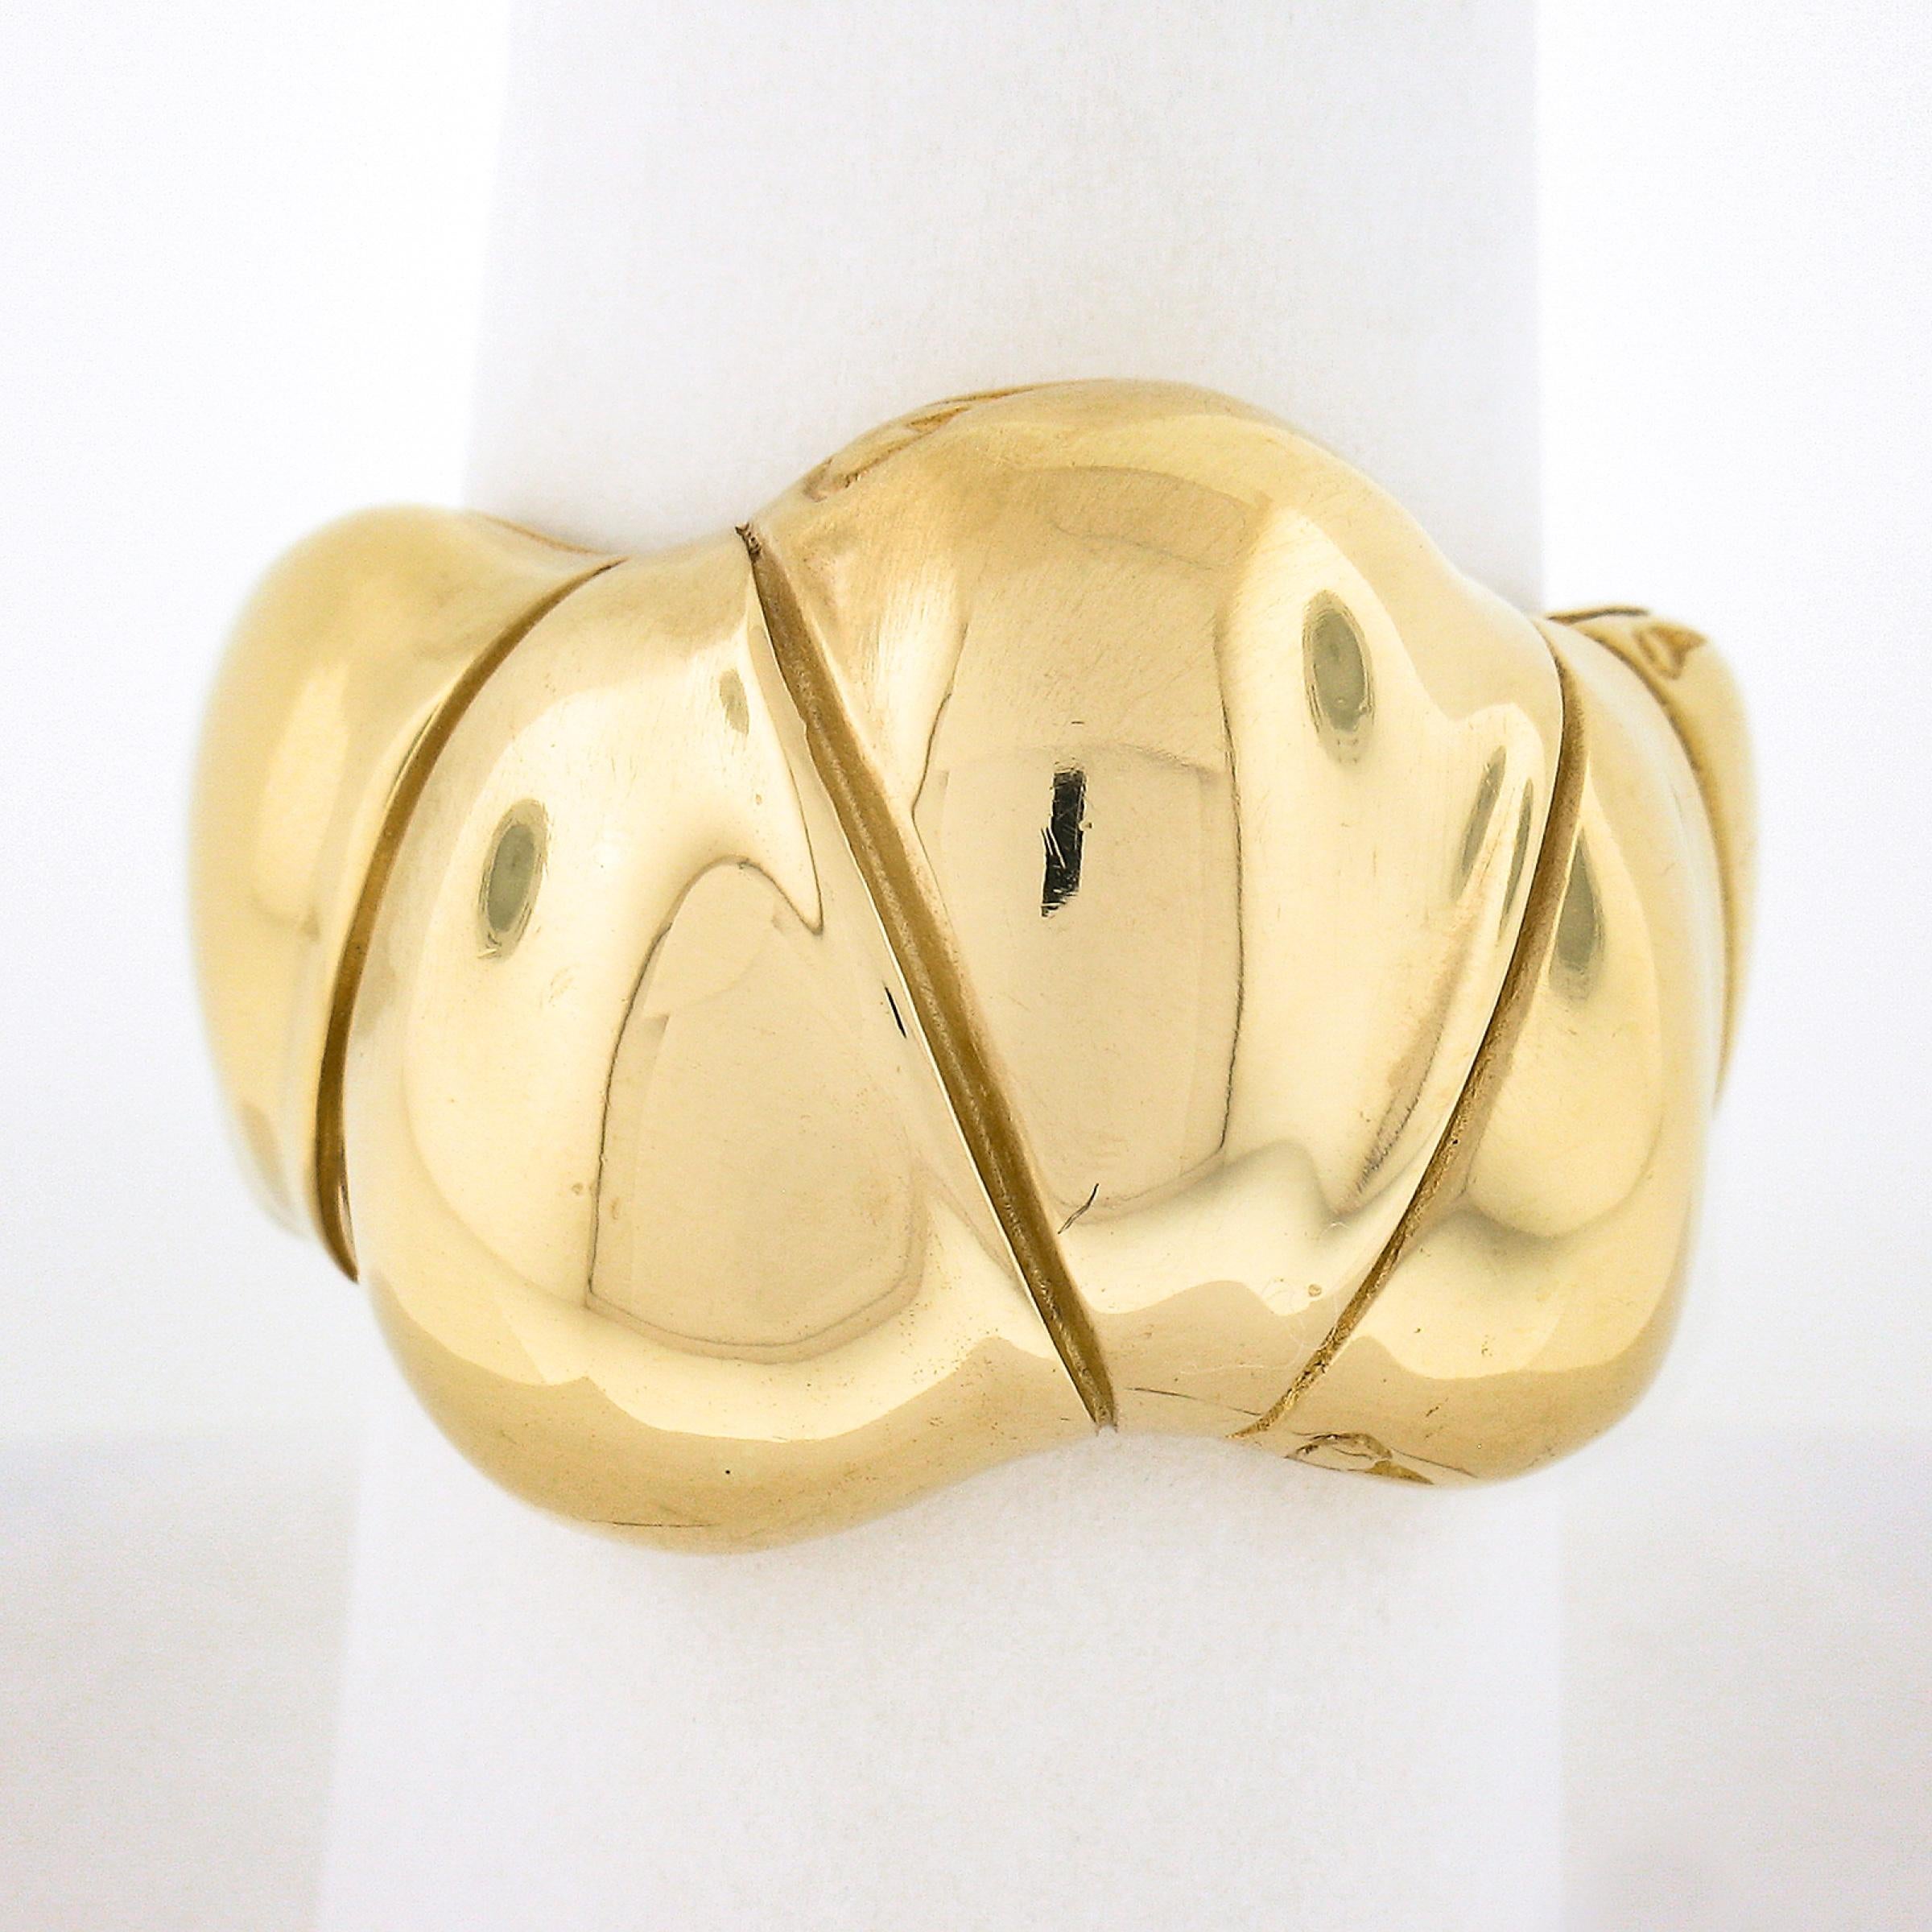 This beautiful ring by John Hardy is from their Bamboo collection and features a puffed design that's nicely detailed and has a high polished finish throughout. This wide ring wears comfortably has a lot of finger coverage. It remains in excellent